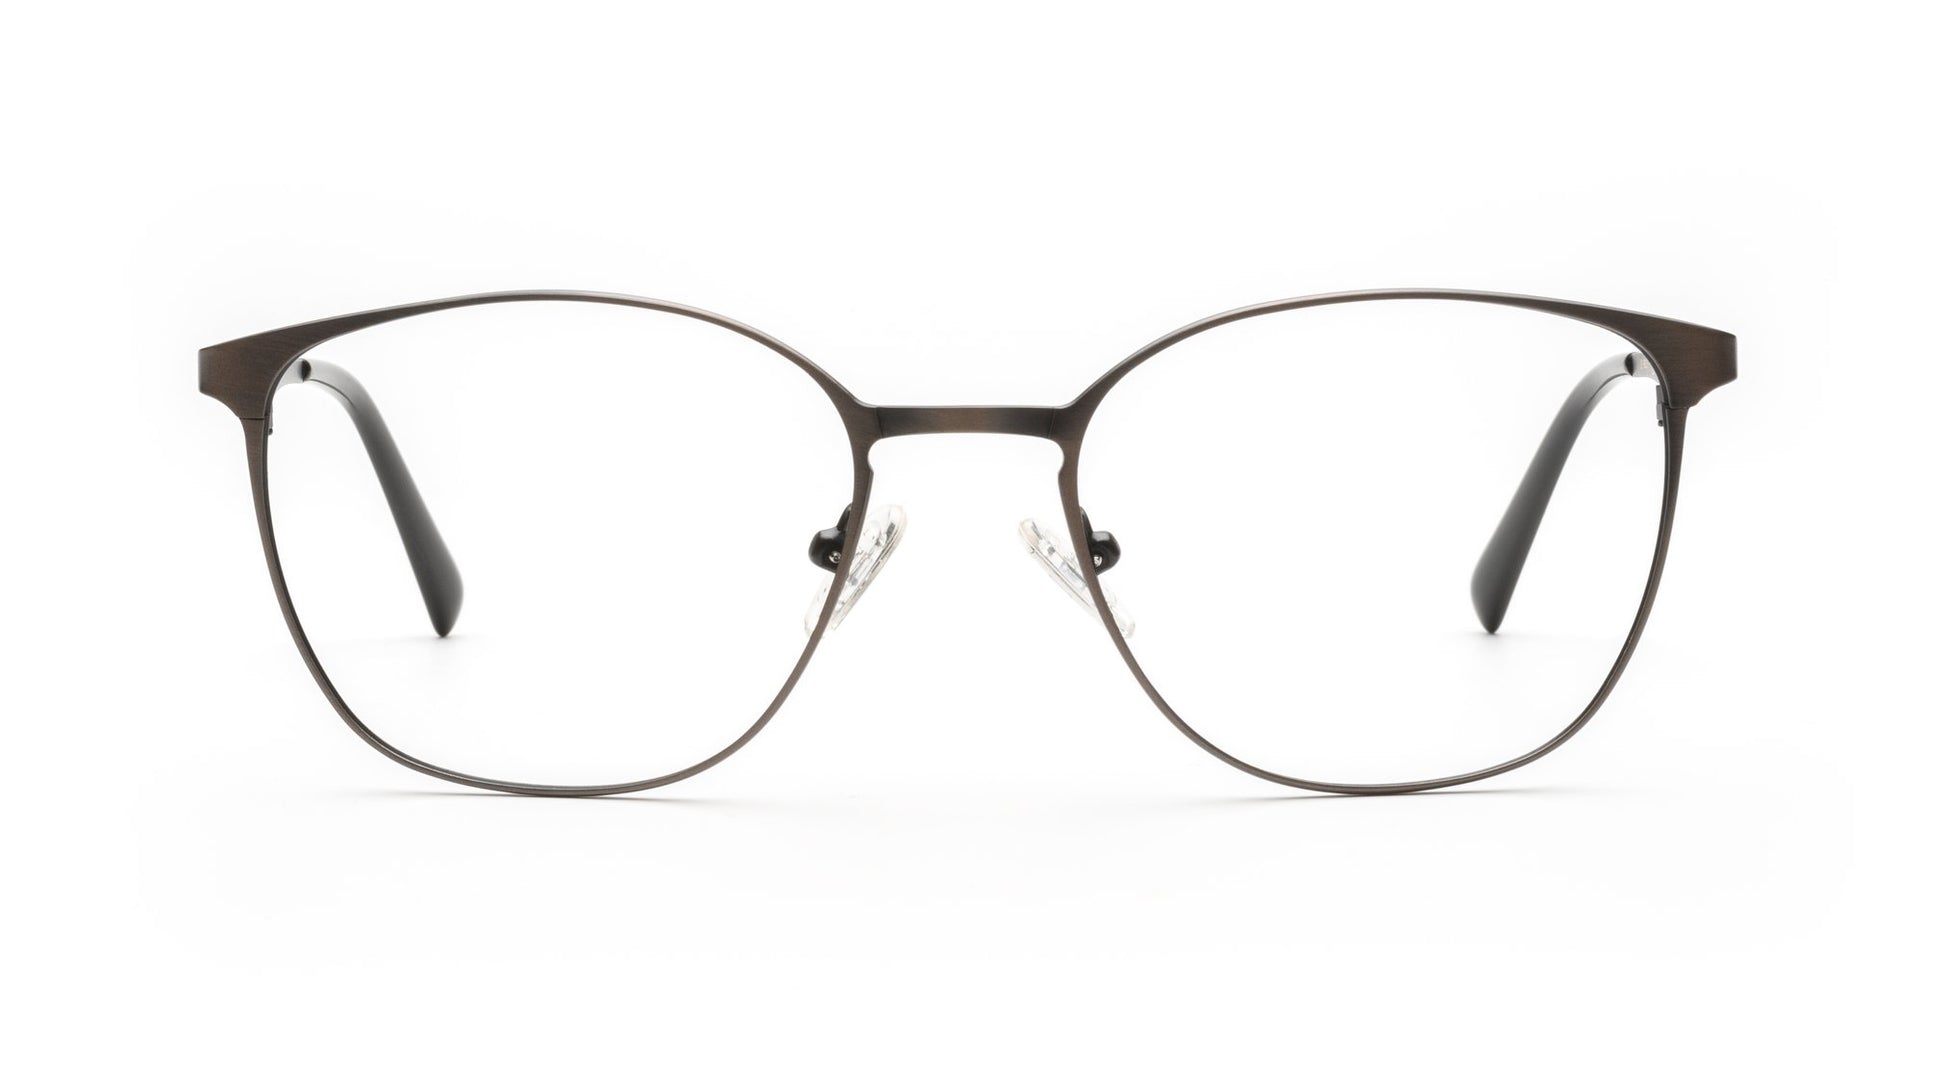 A stylish thin metal frame. A trendy shape that looks great on everyone. On the cutting edge of style and stylish enough to make a simple yet refined statement.